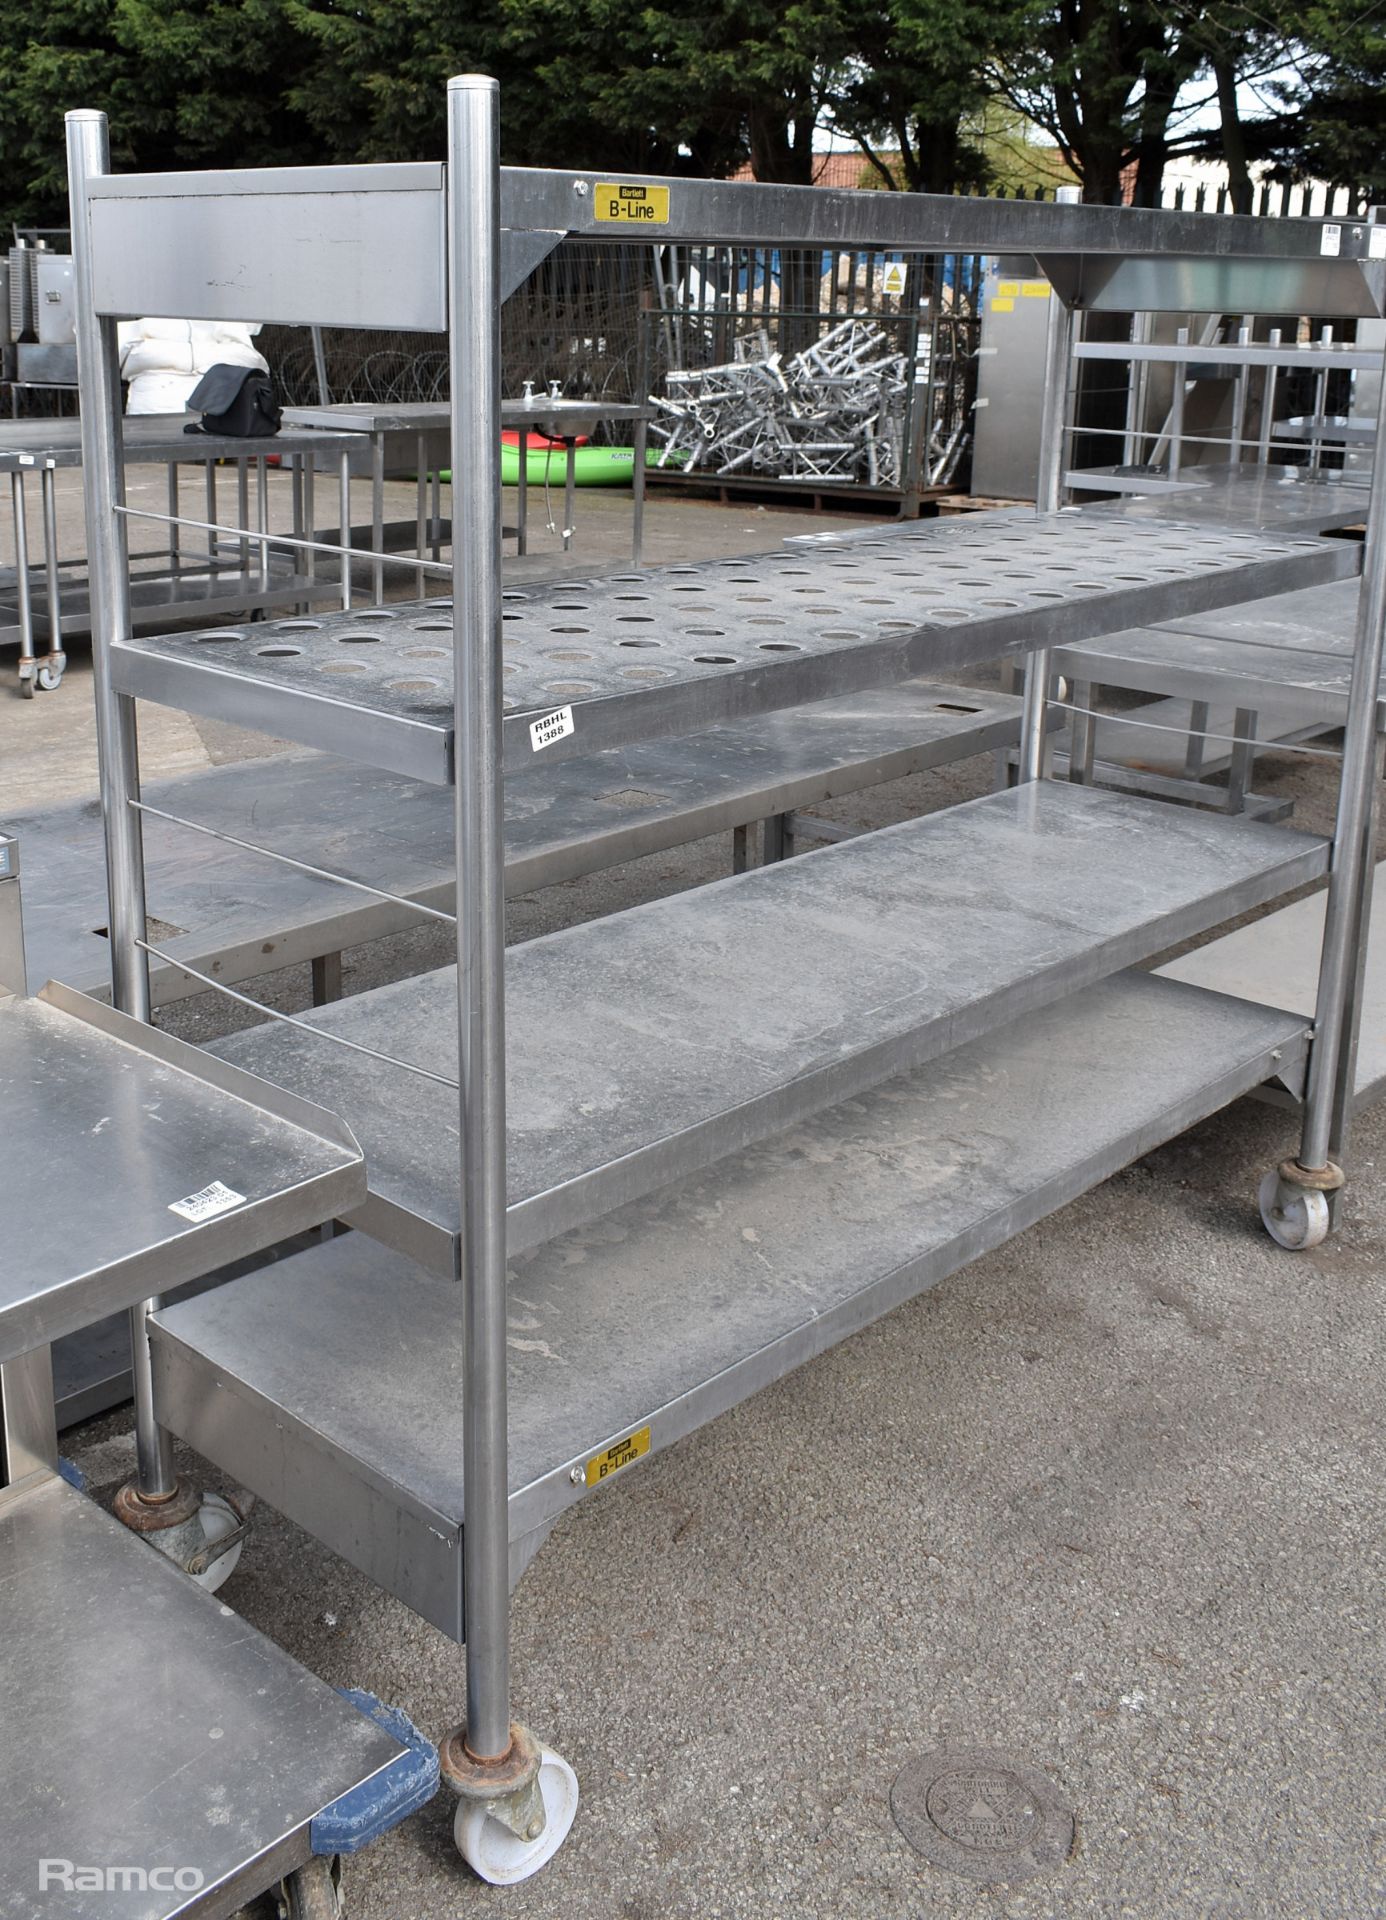 Bartlett B-Line stainless steel 4 tier shelving unit - W 1800 x D 650 x H 1645mm - Image 3 of 4